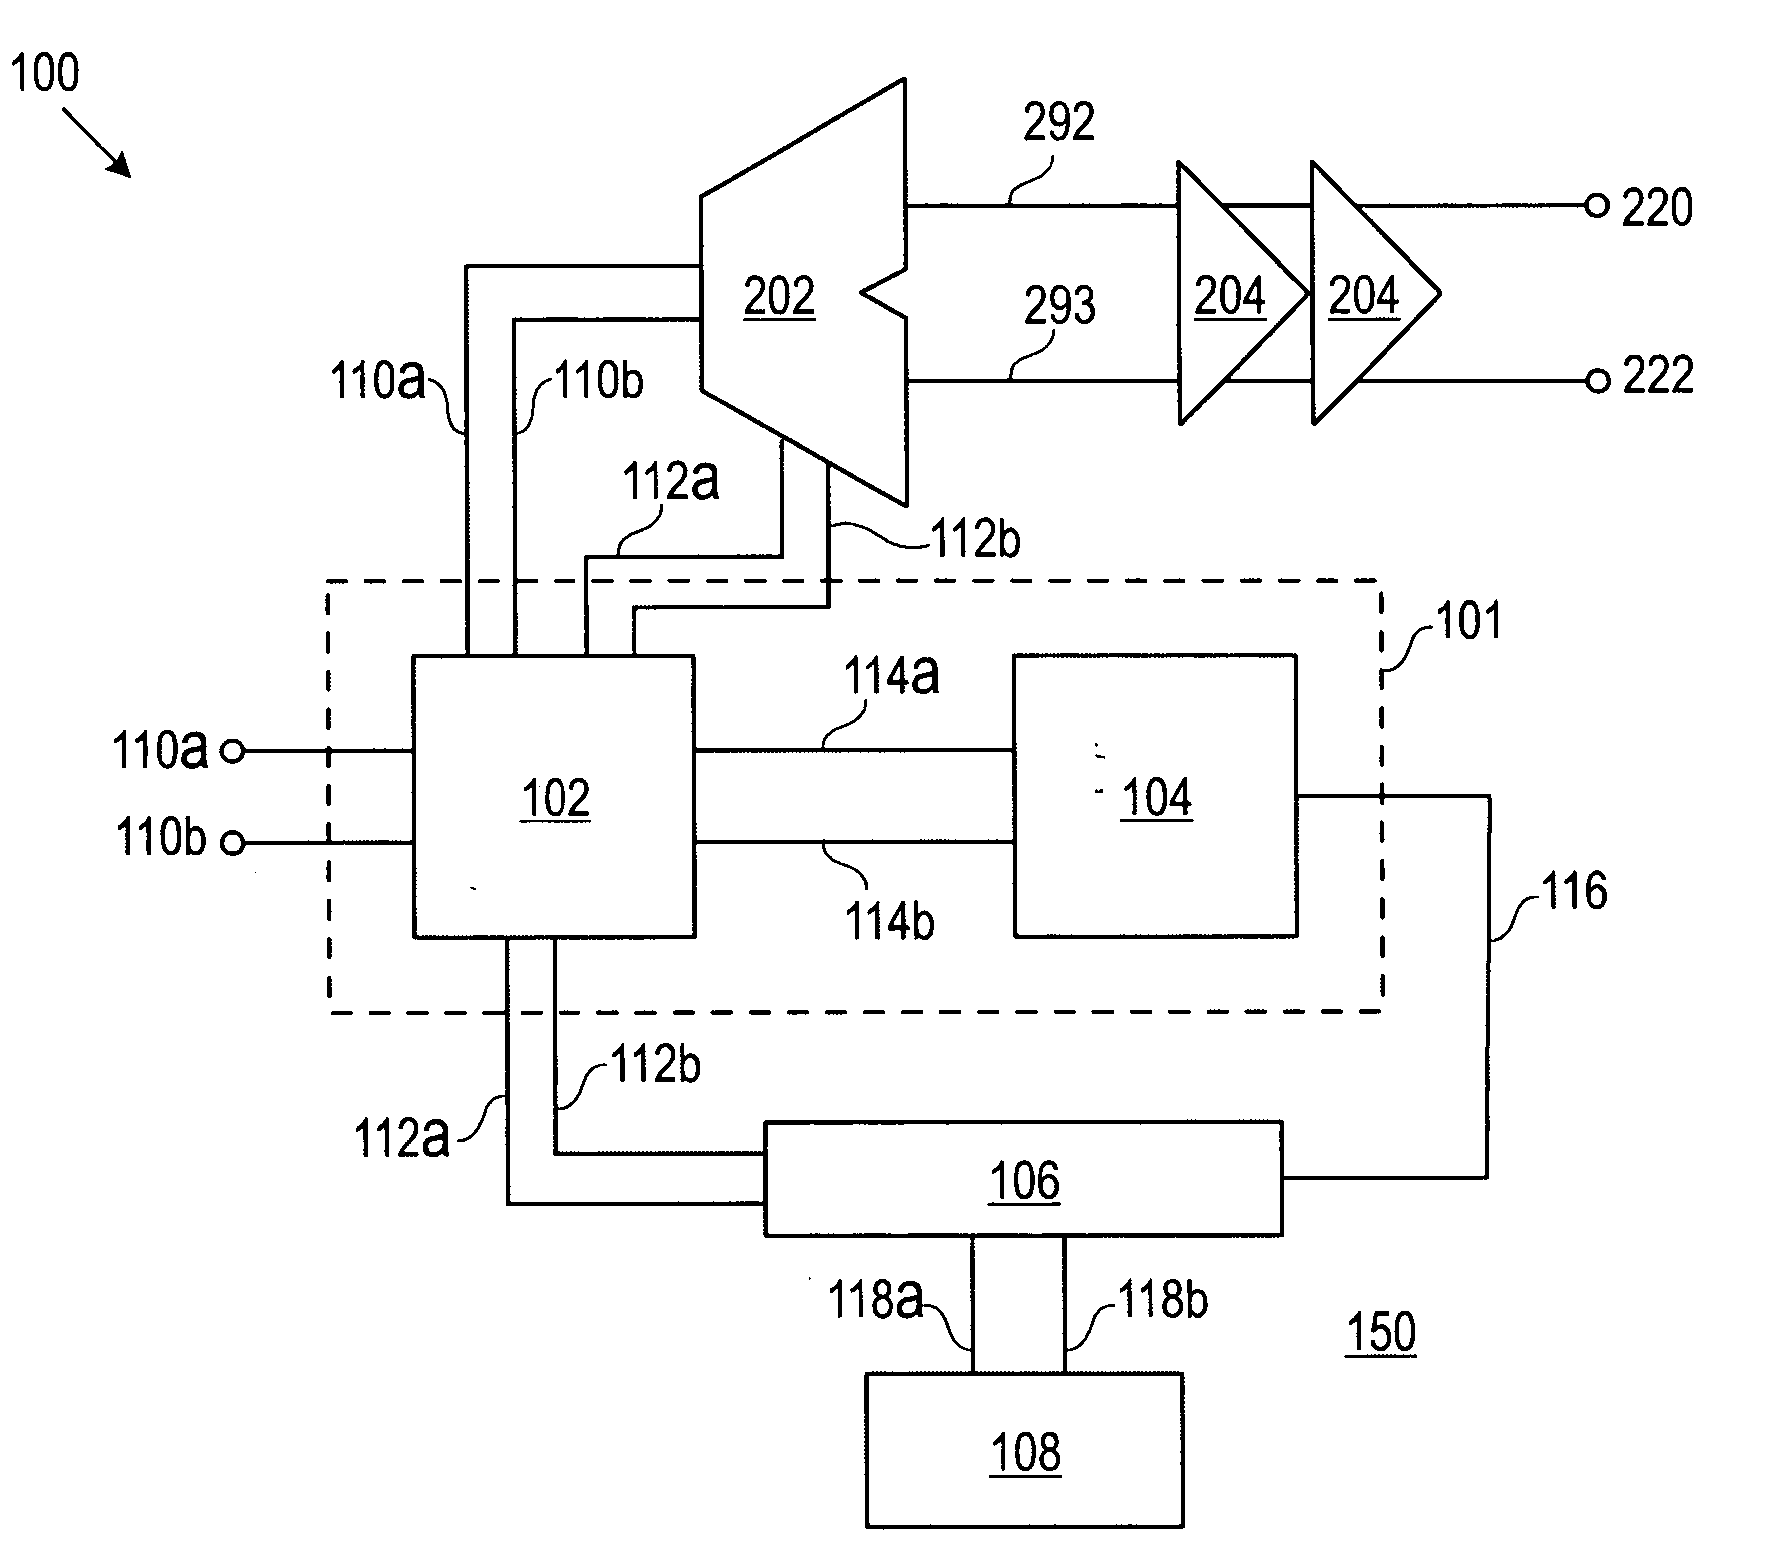 Distributed delay-locked-based clock and data recovery systems